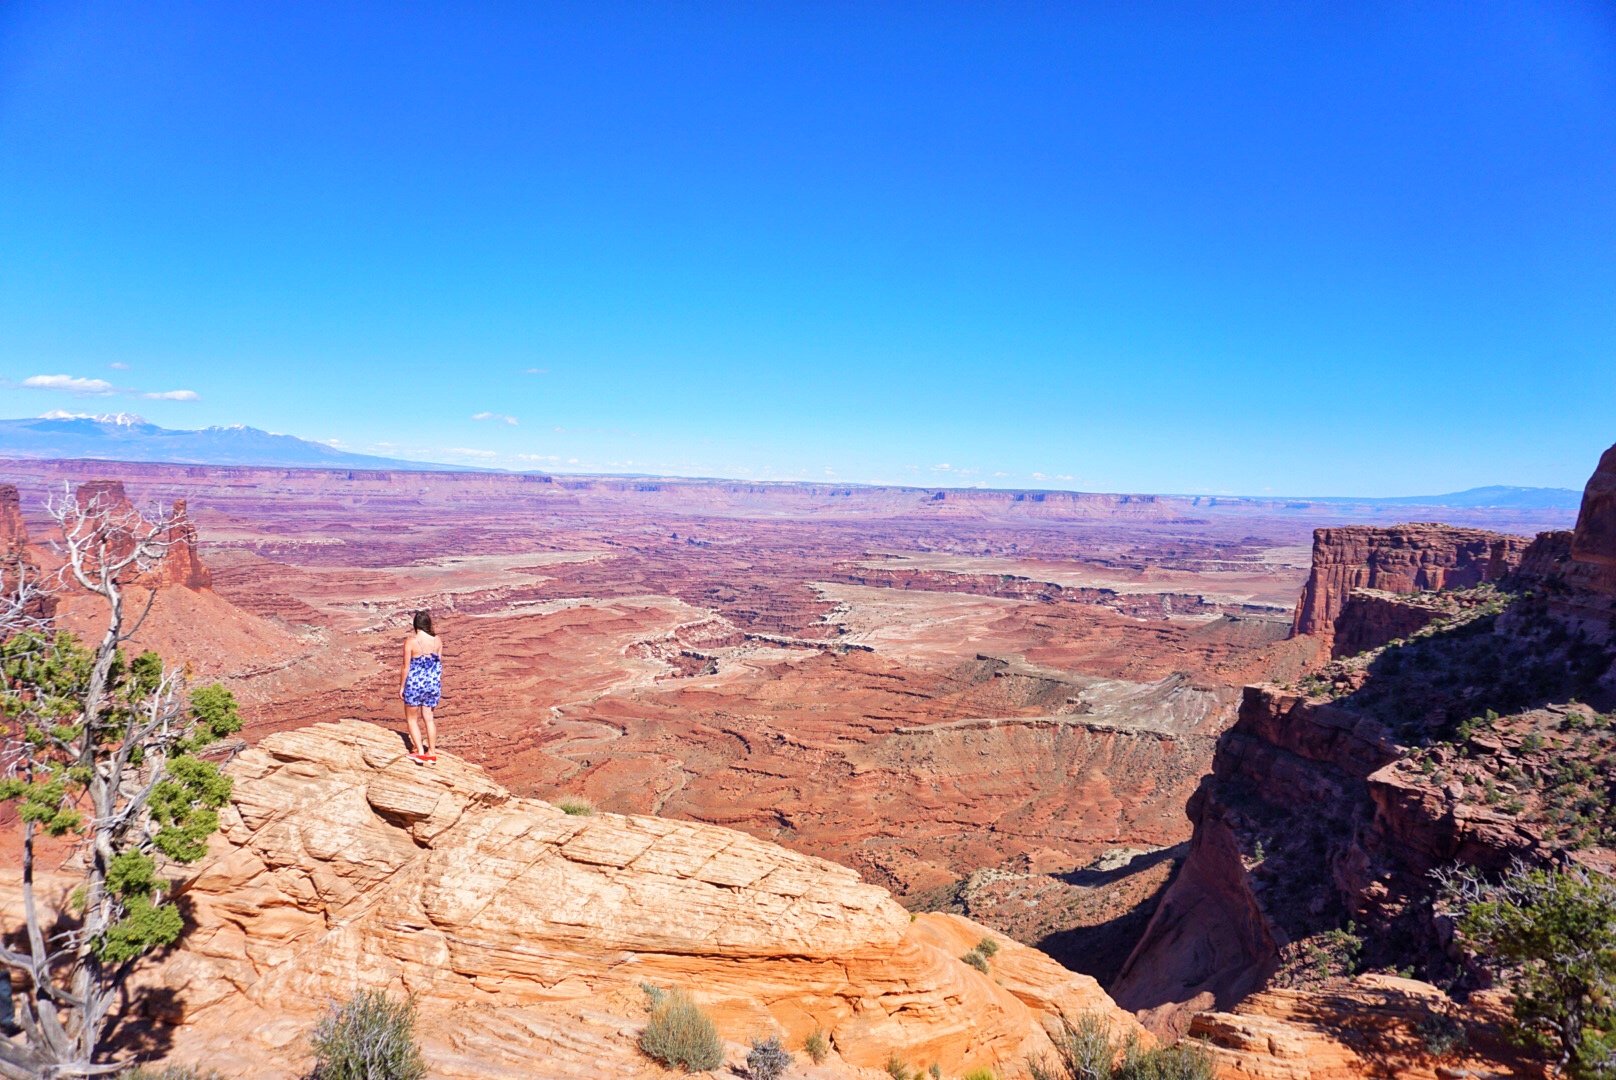 Allison standing at the edge in Canyonlands national park